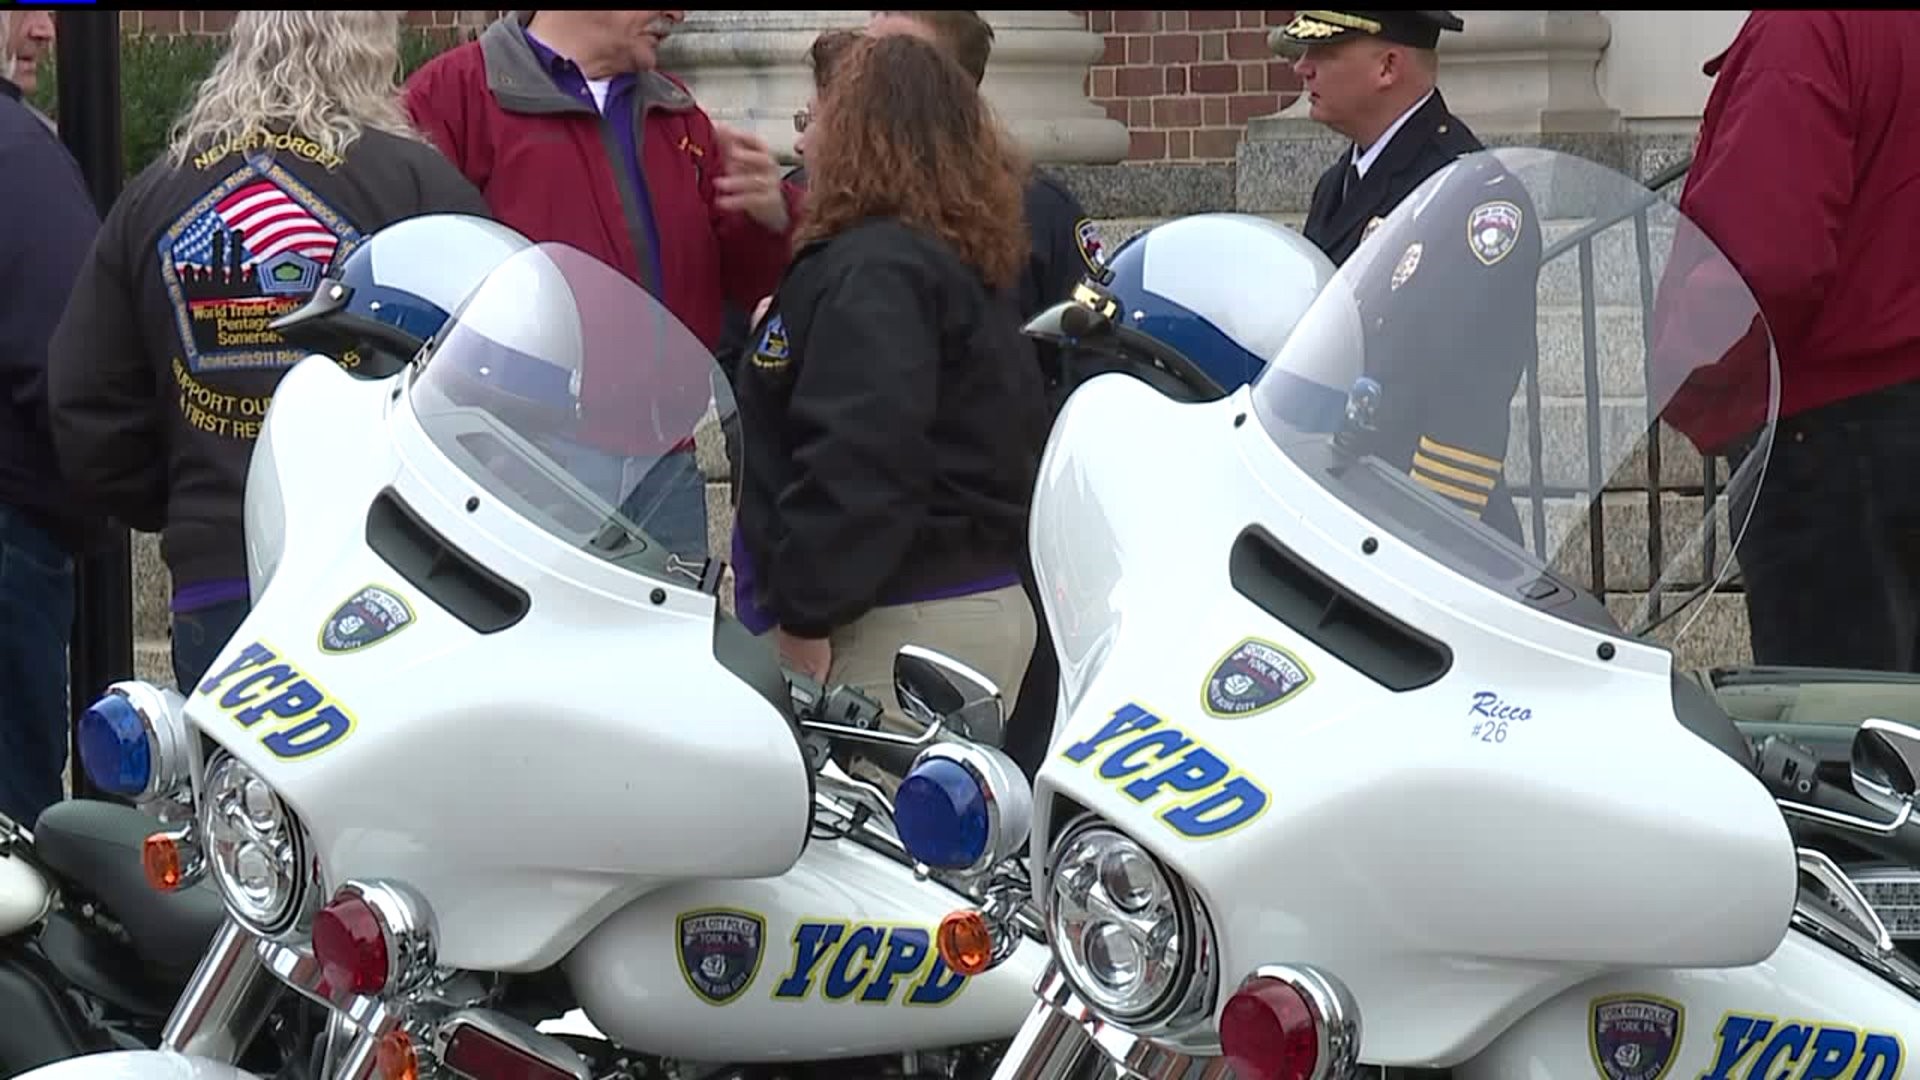 York City Police Department receives motorcycle donation